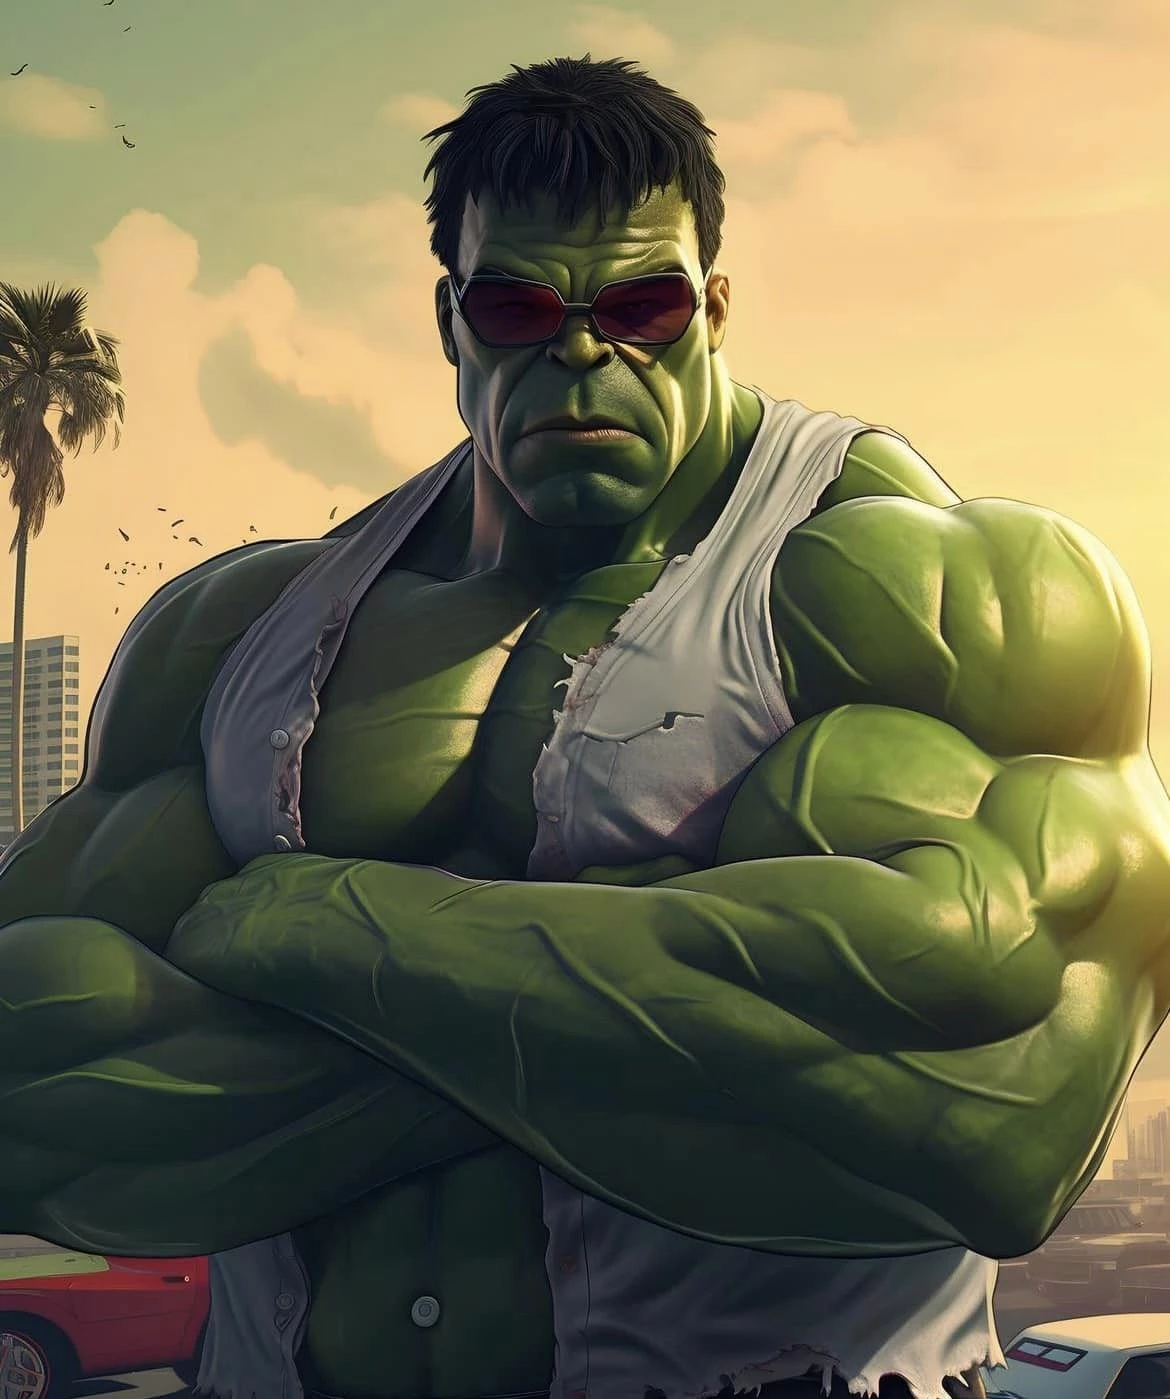 Nice Shades You Have There, Hulk. He’s Smashing It!